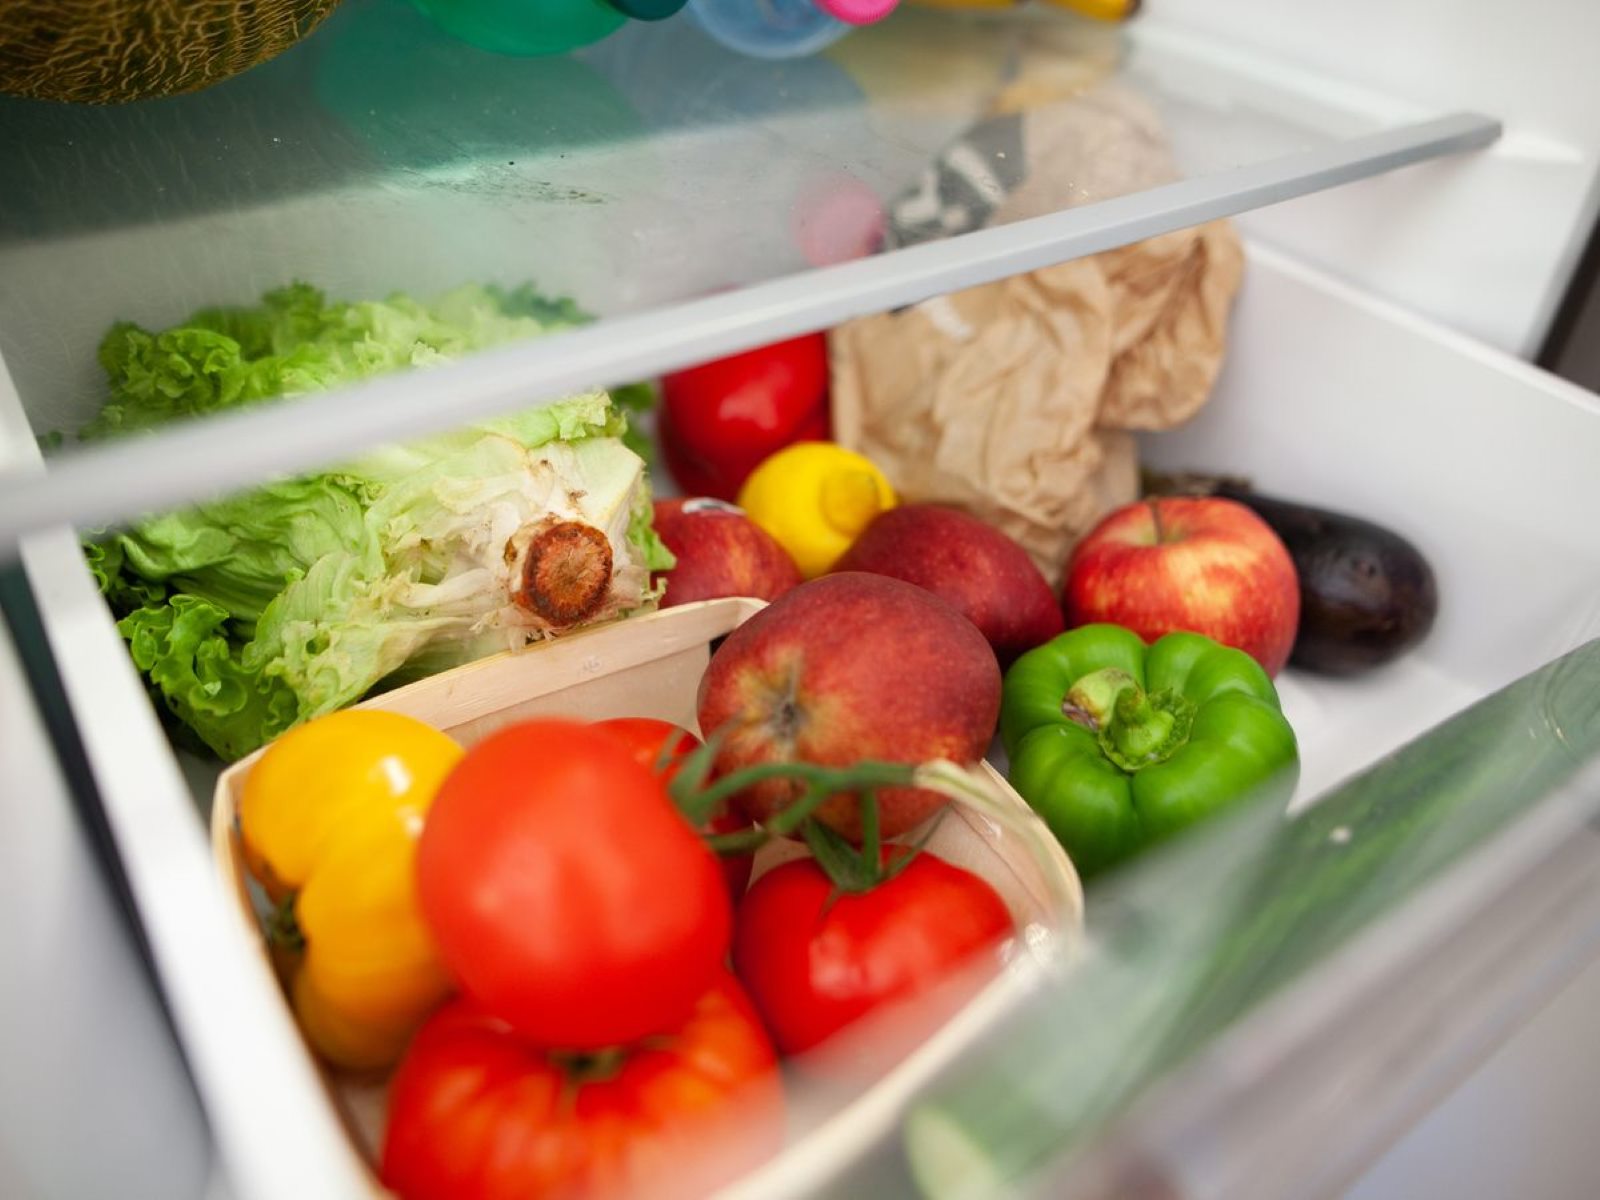 How To Store Vegetables In Fridge Without Plastic